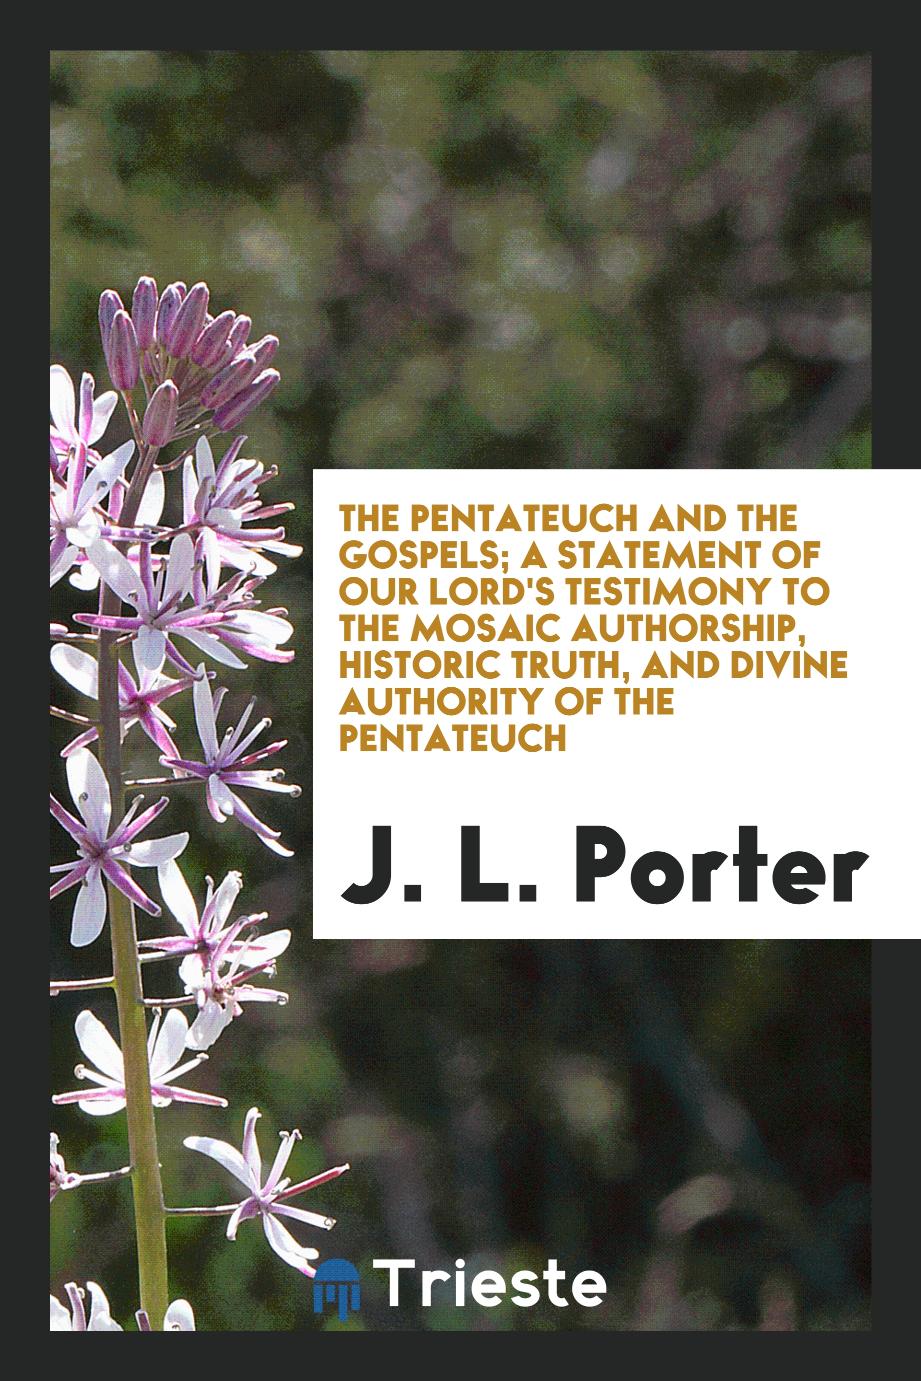 The Pentateuch and the Gospels; A Statement of Our Lord's Testimony to the Mosaic Authorship, Historic Truth, and Divine Authority of the Pentateuch